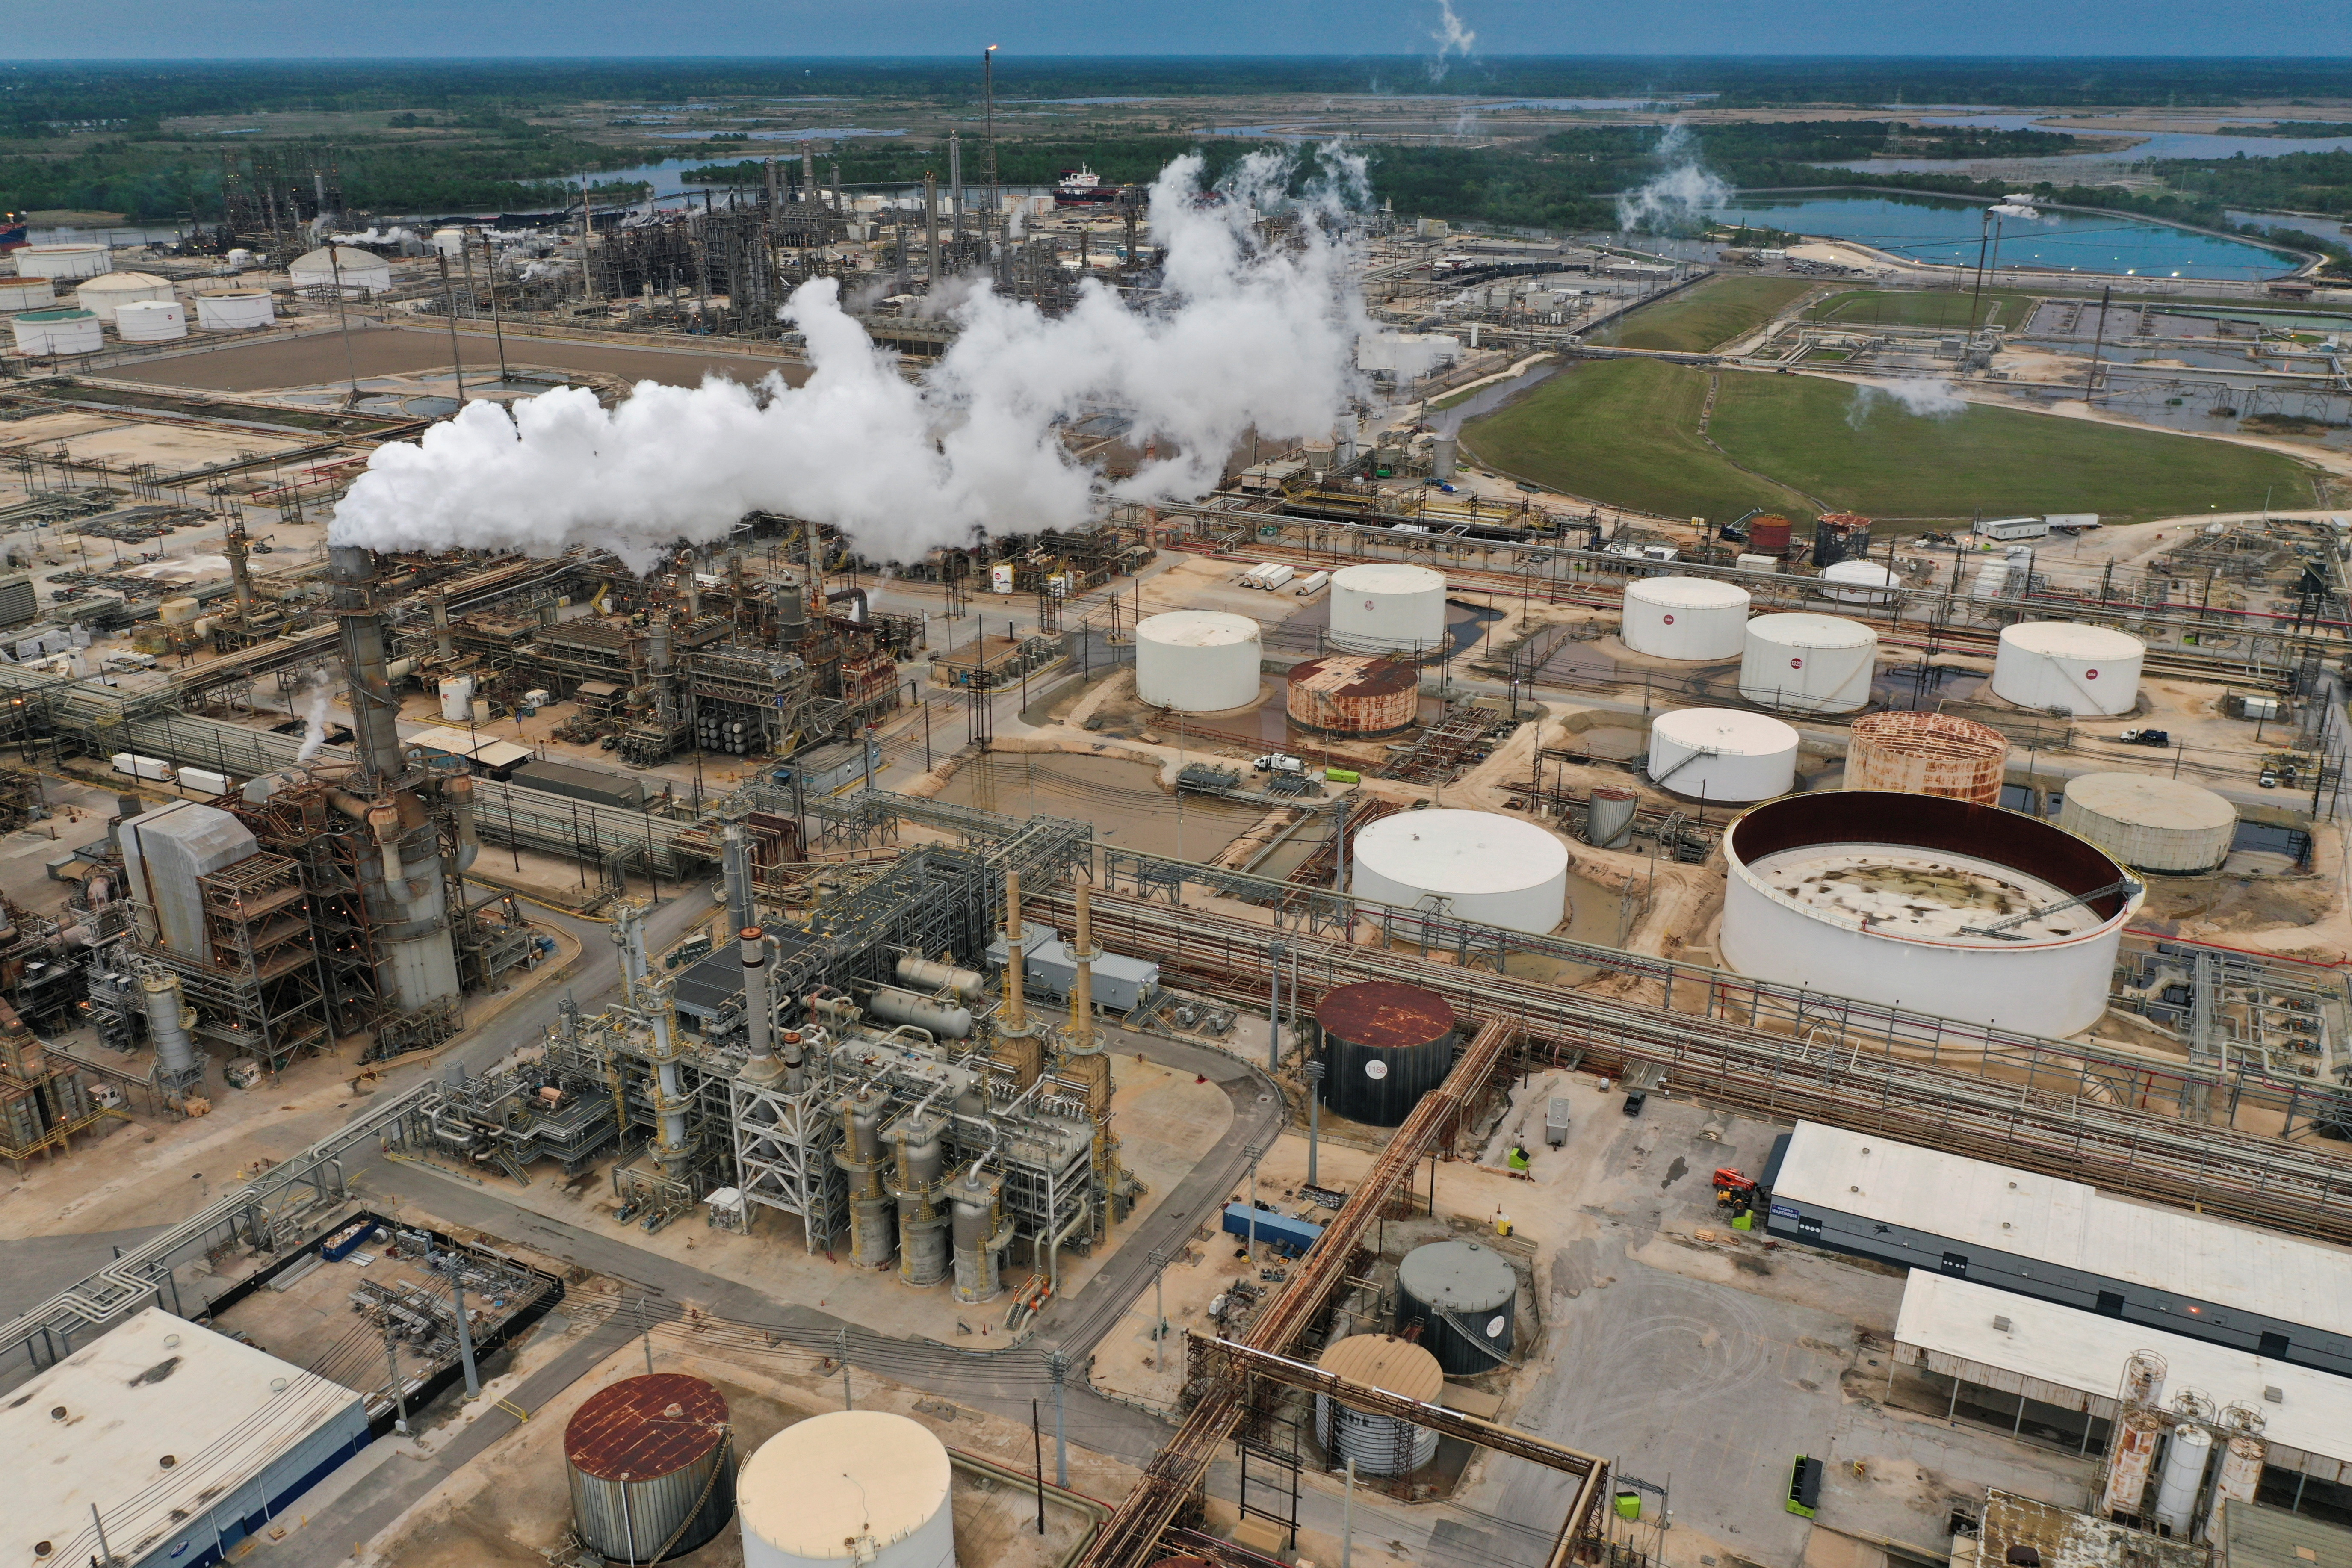 An aerial view shows flue gas and steam rising from a distillation tower at Exxon Mobil’s Beaumont oil refinery